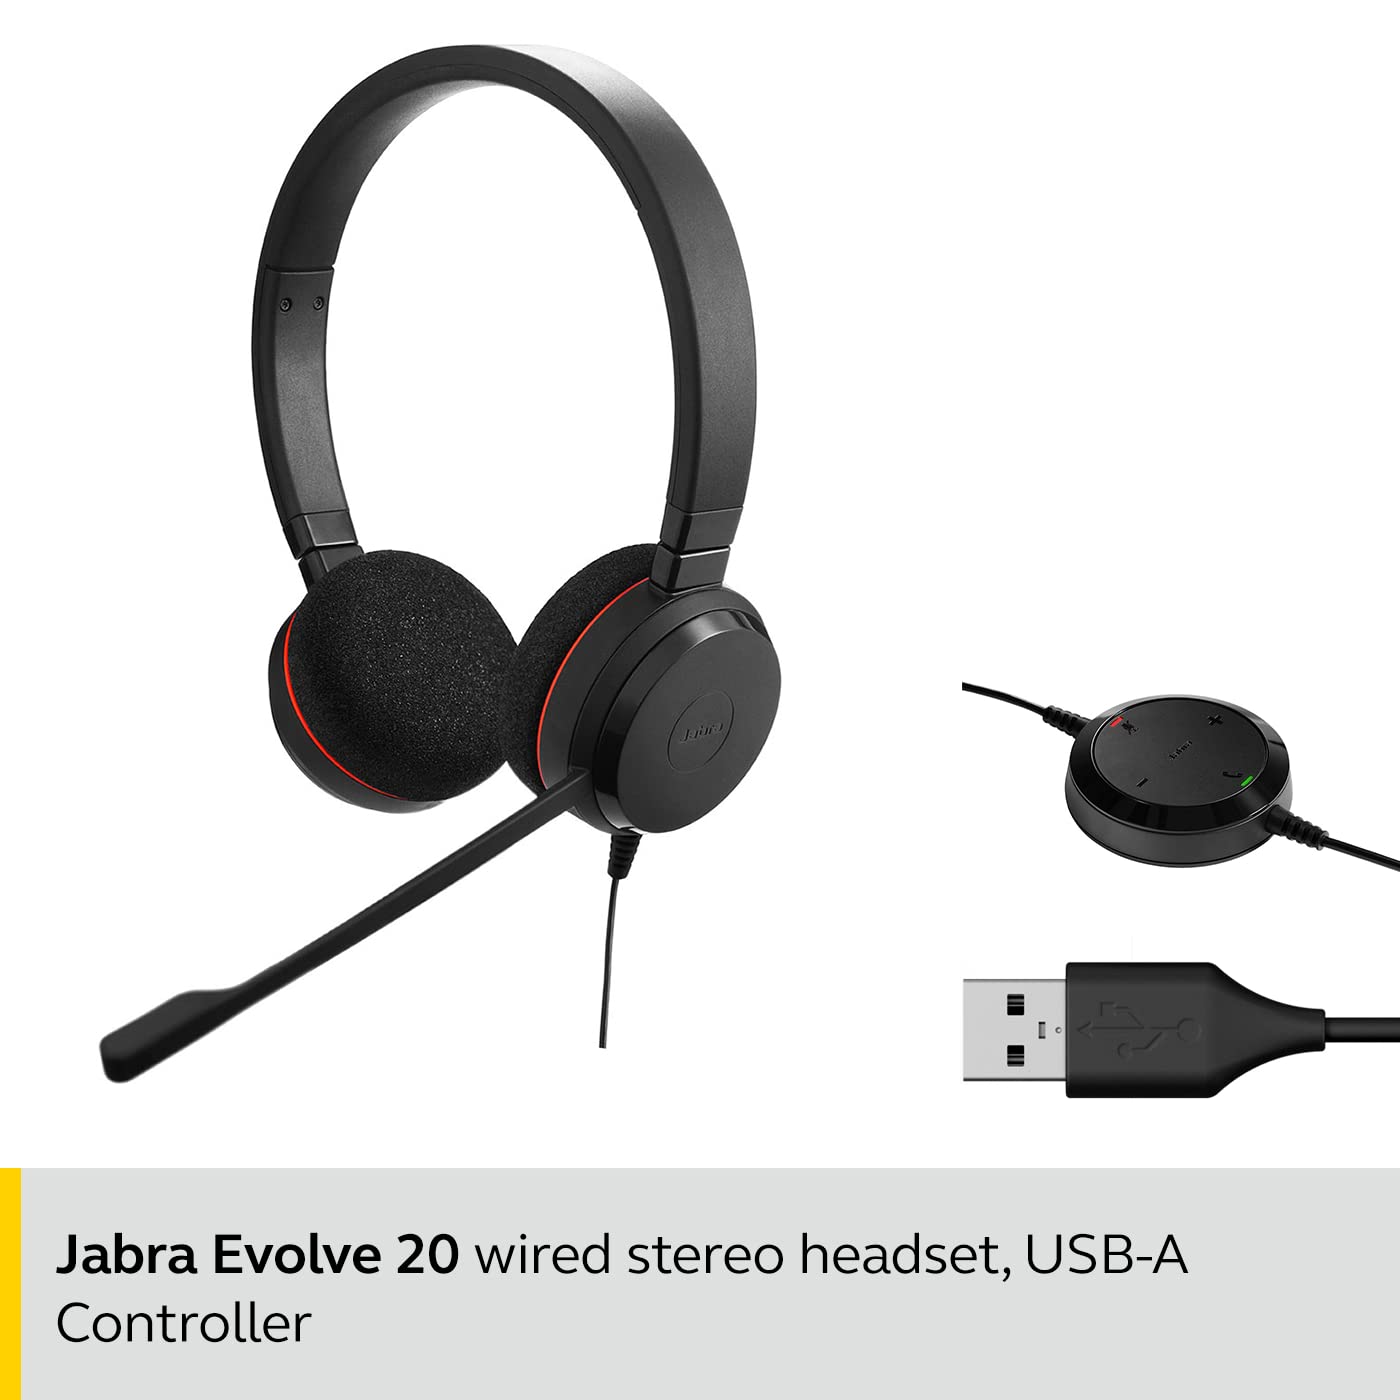 Jabra Evolve 20 UC Wired Headset, Stereo Professional Telephone Headphones for Greater Productivity, Superior Sound for Calls and Music, USB Connection, All Day Comfort Design